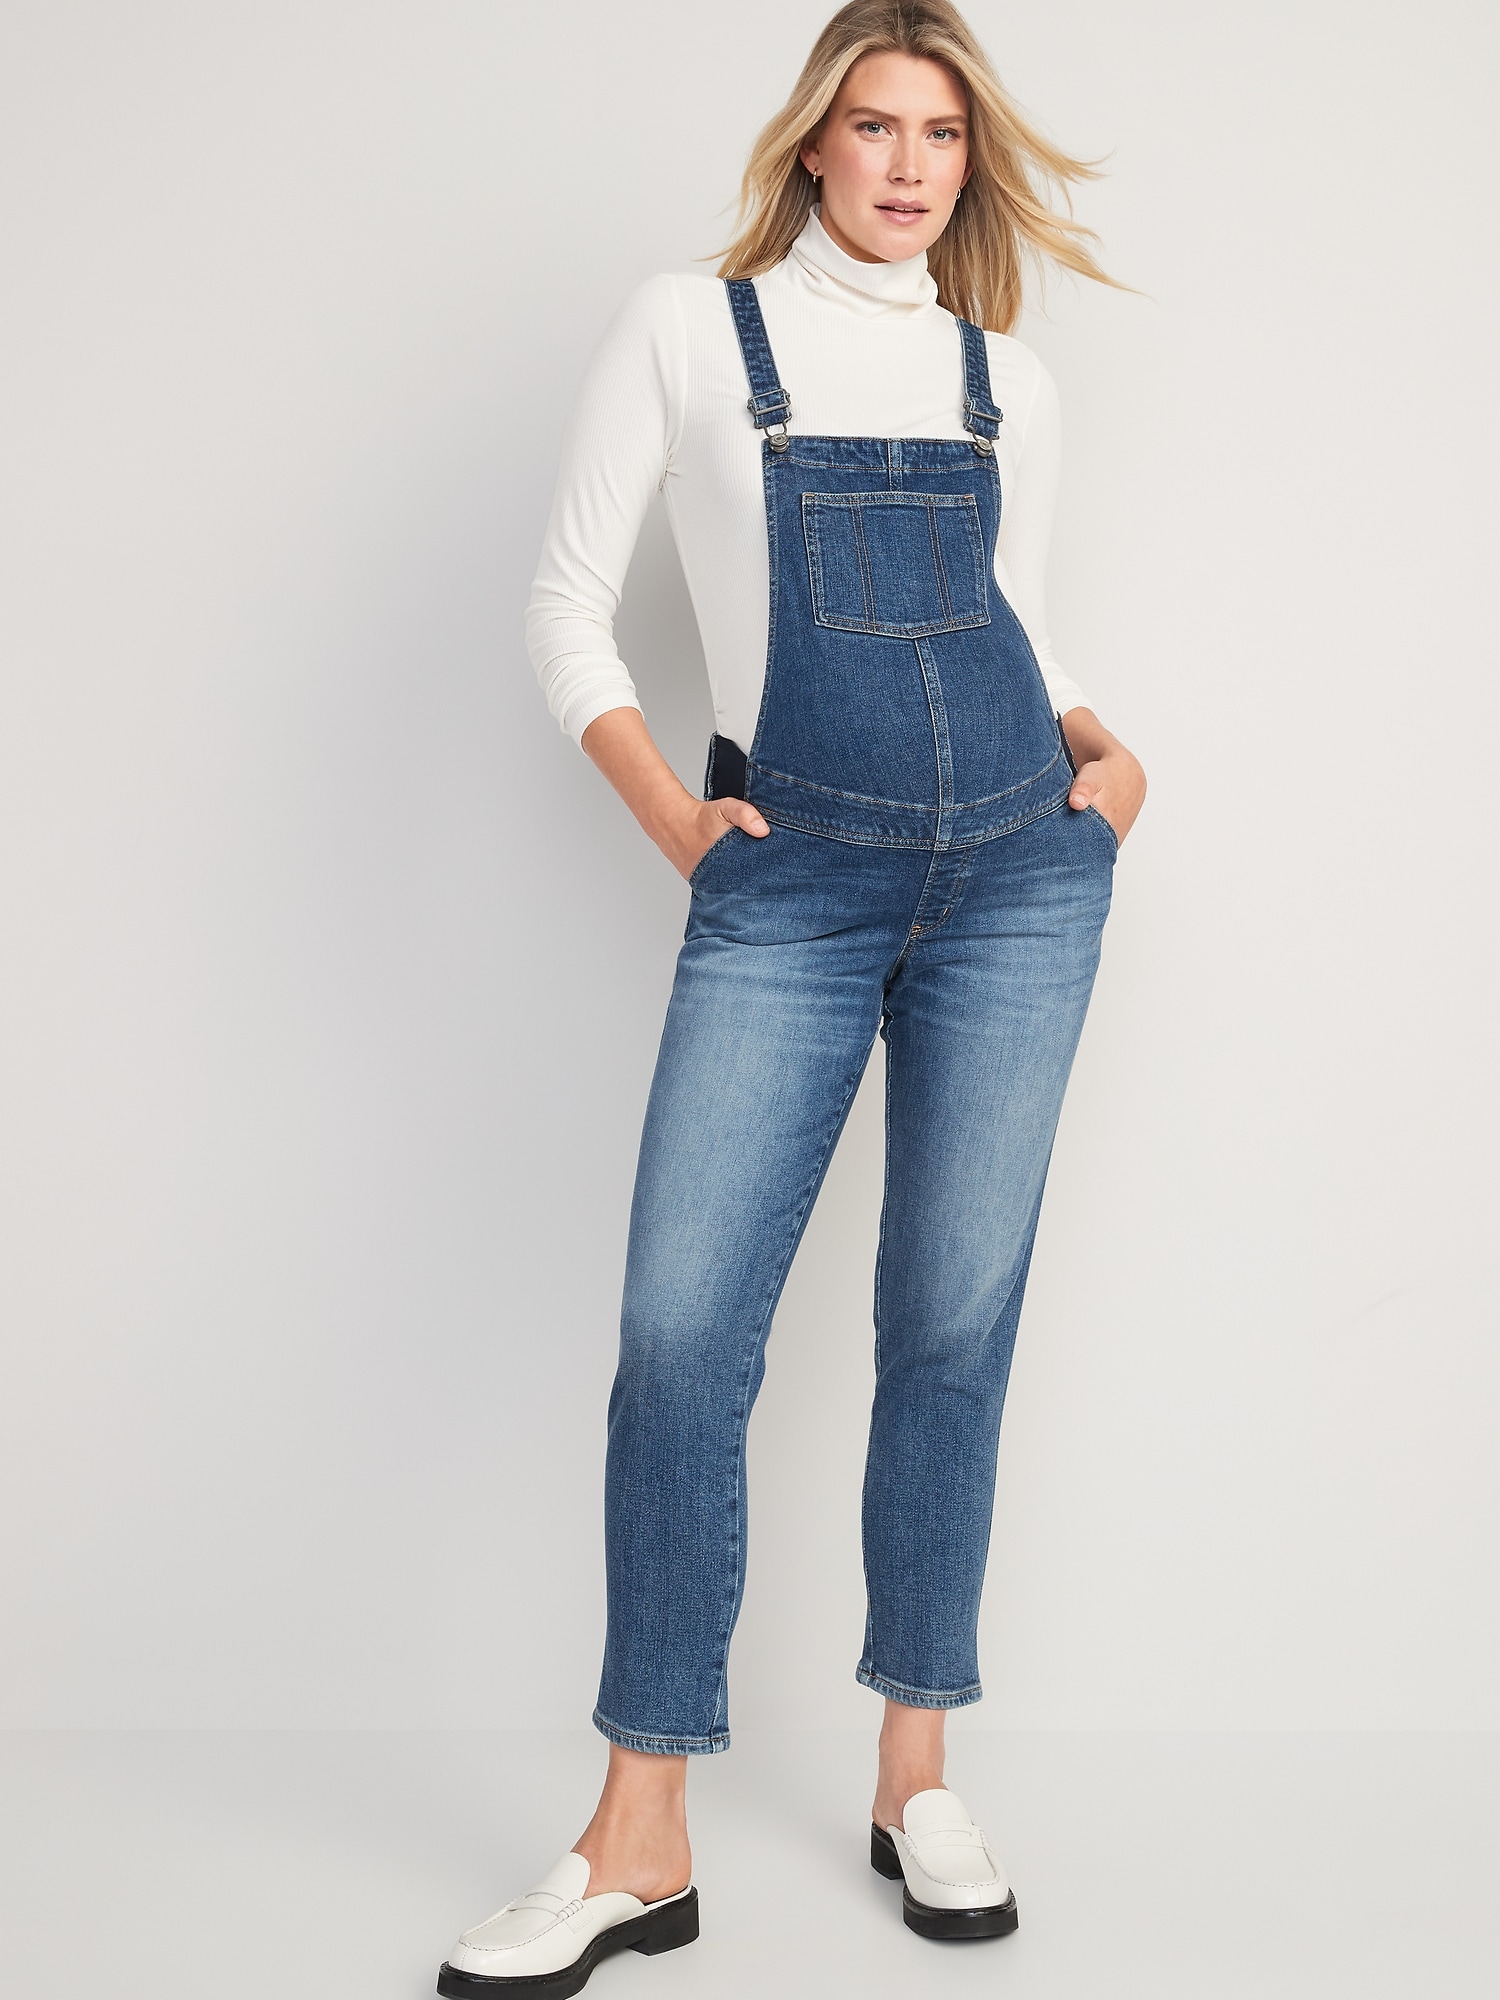 7 comfy maternity overalls to proudly display your bump in